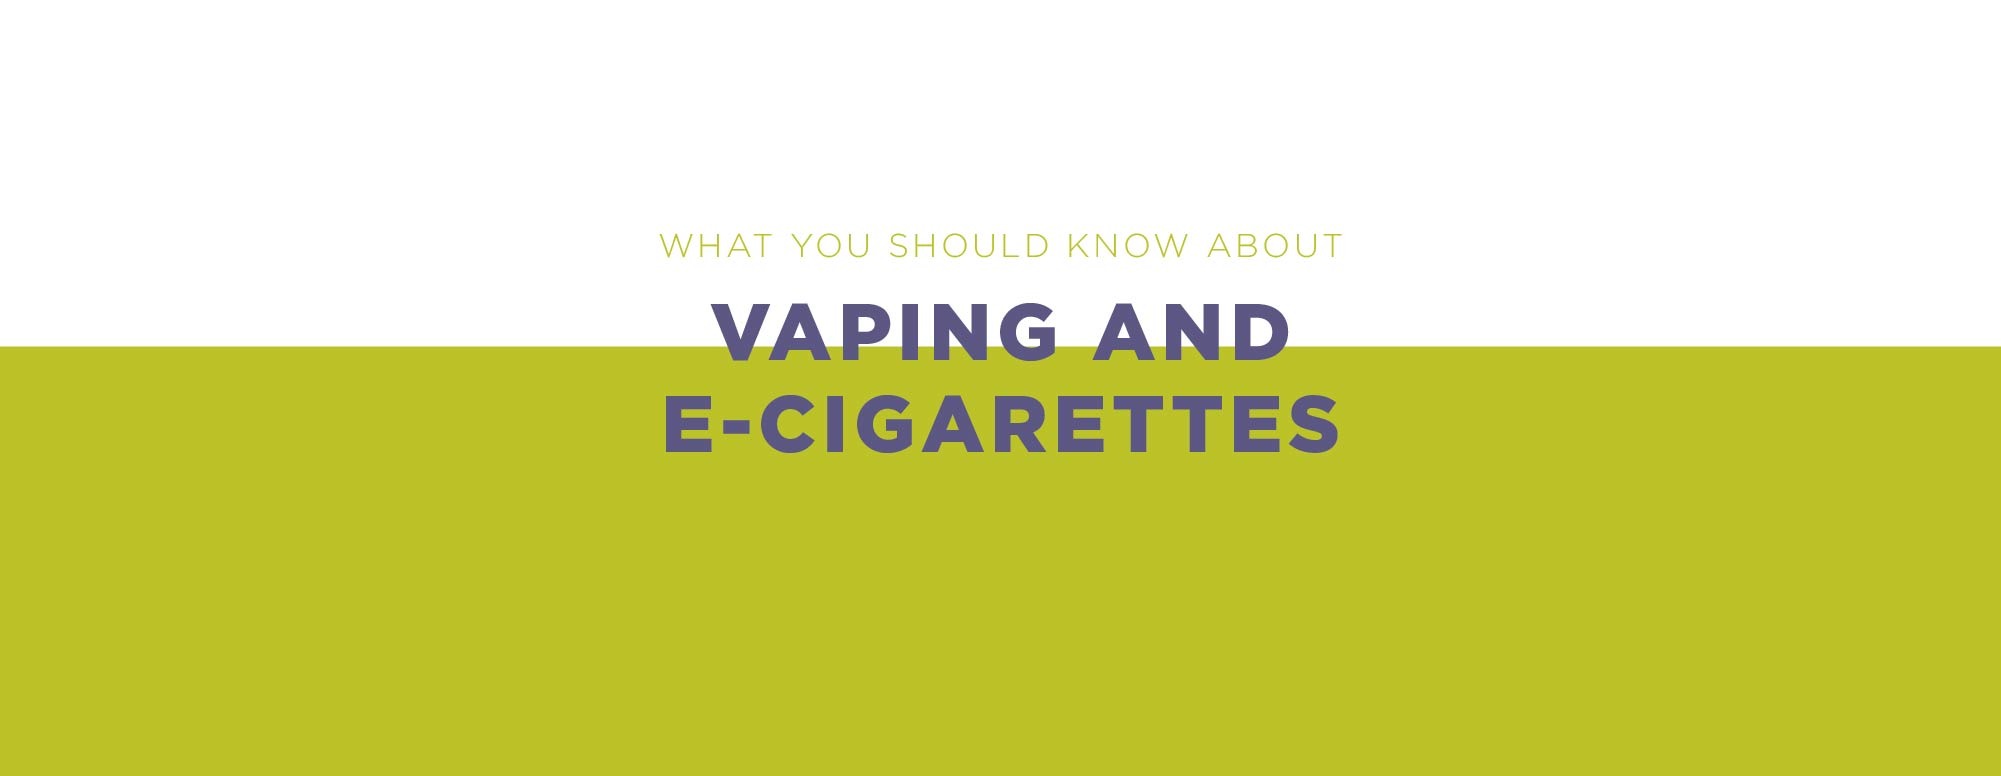 E-cigarettes and Vaping: What You Should Know